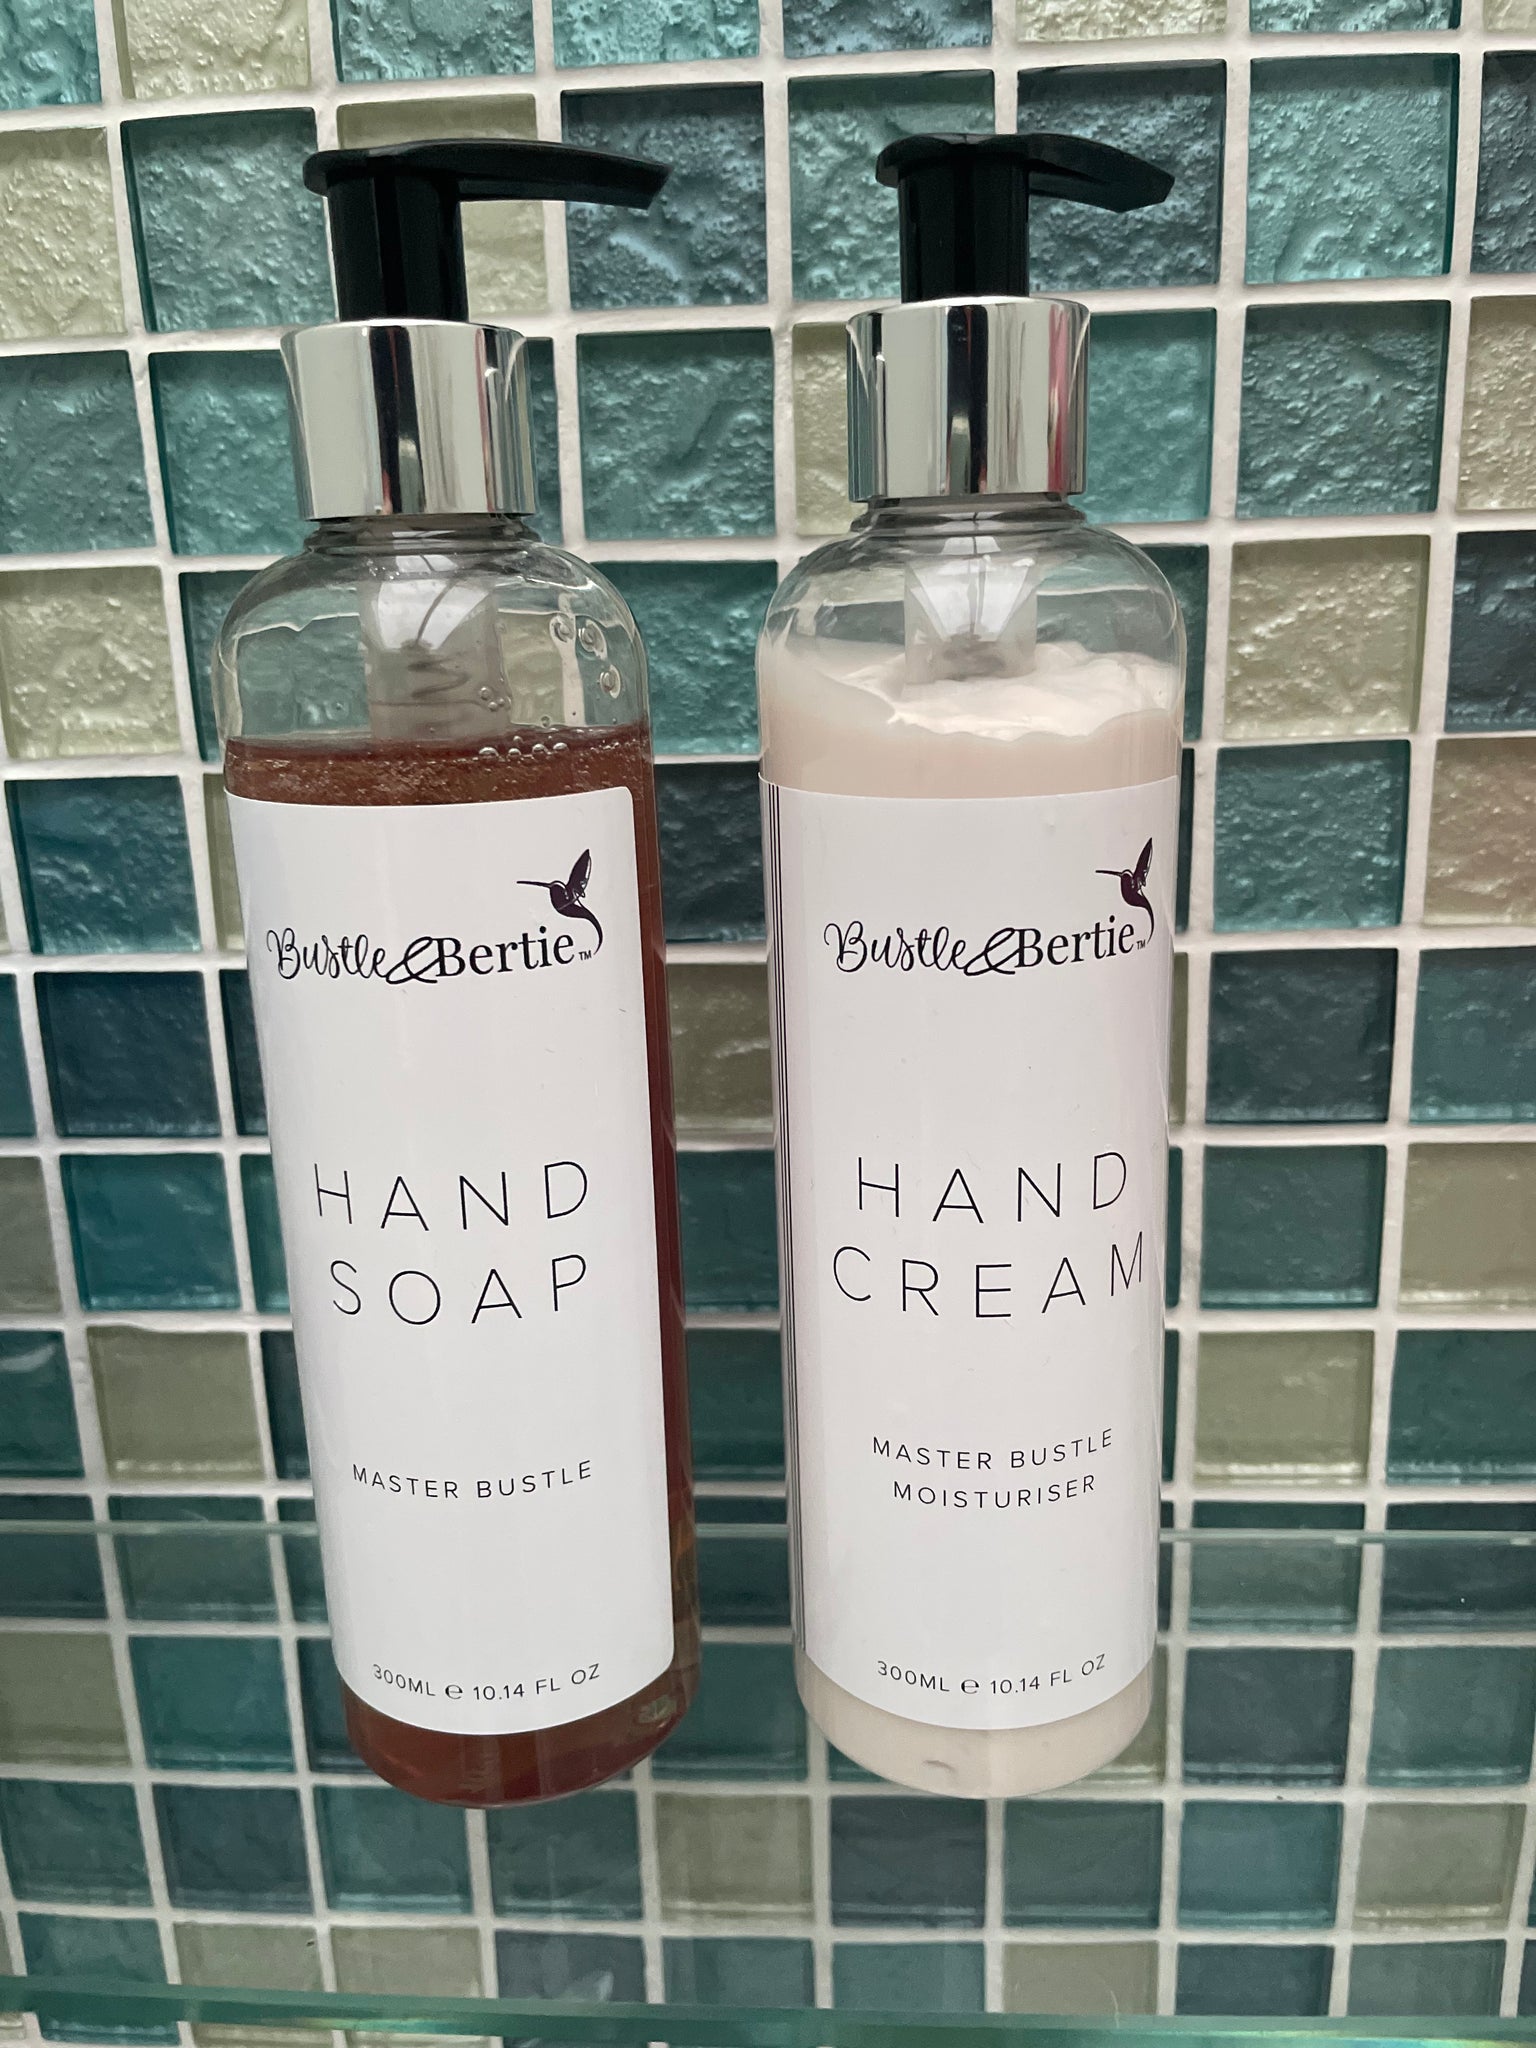 MASTER BUSTLE'S HAND SOAP AND HAND CREAM